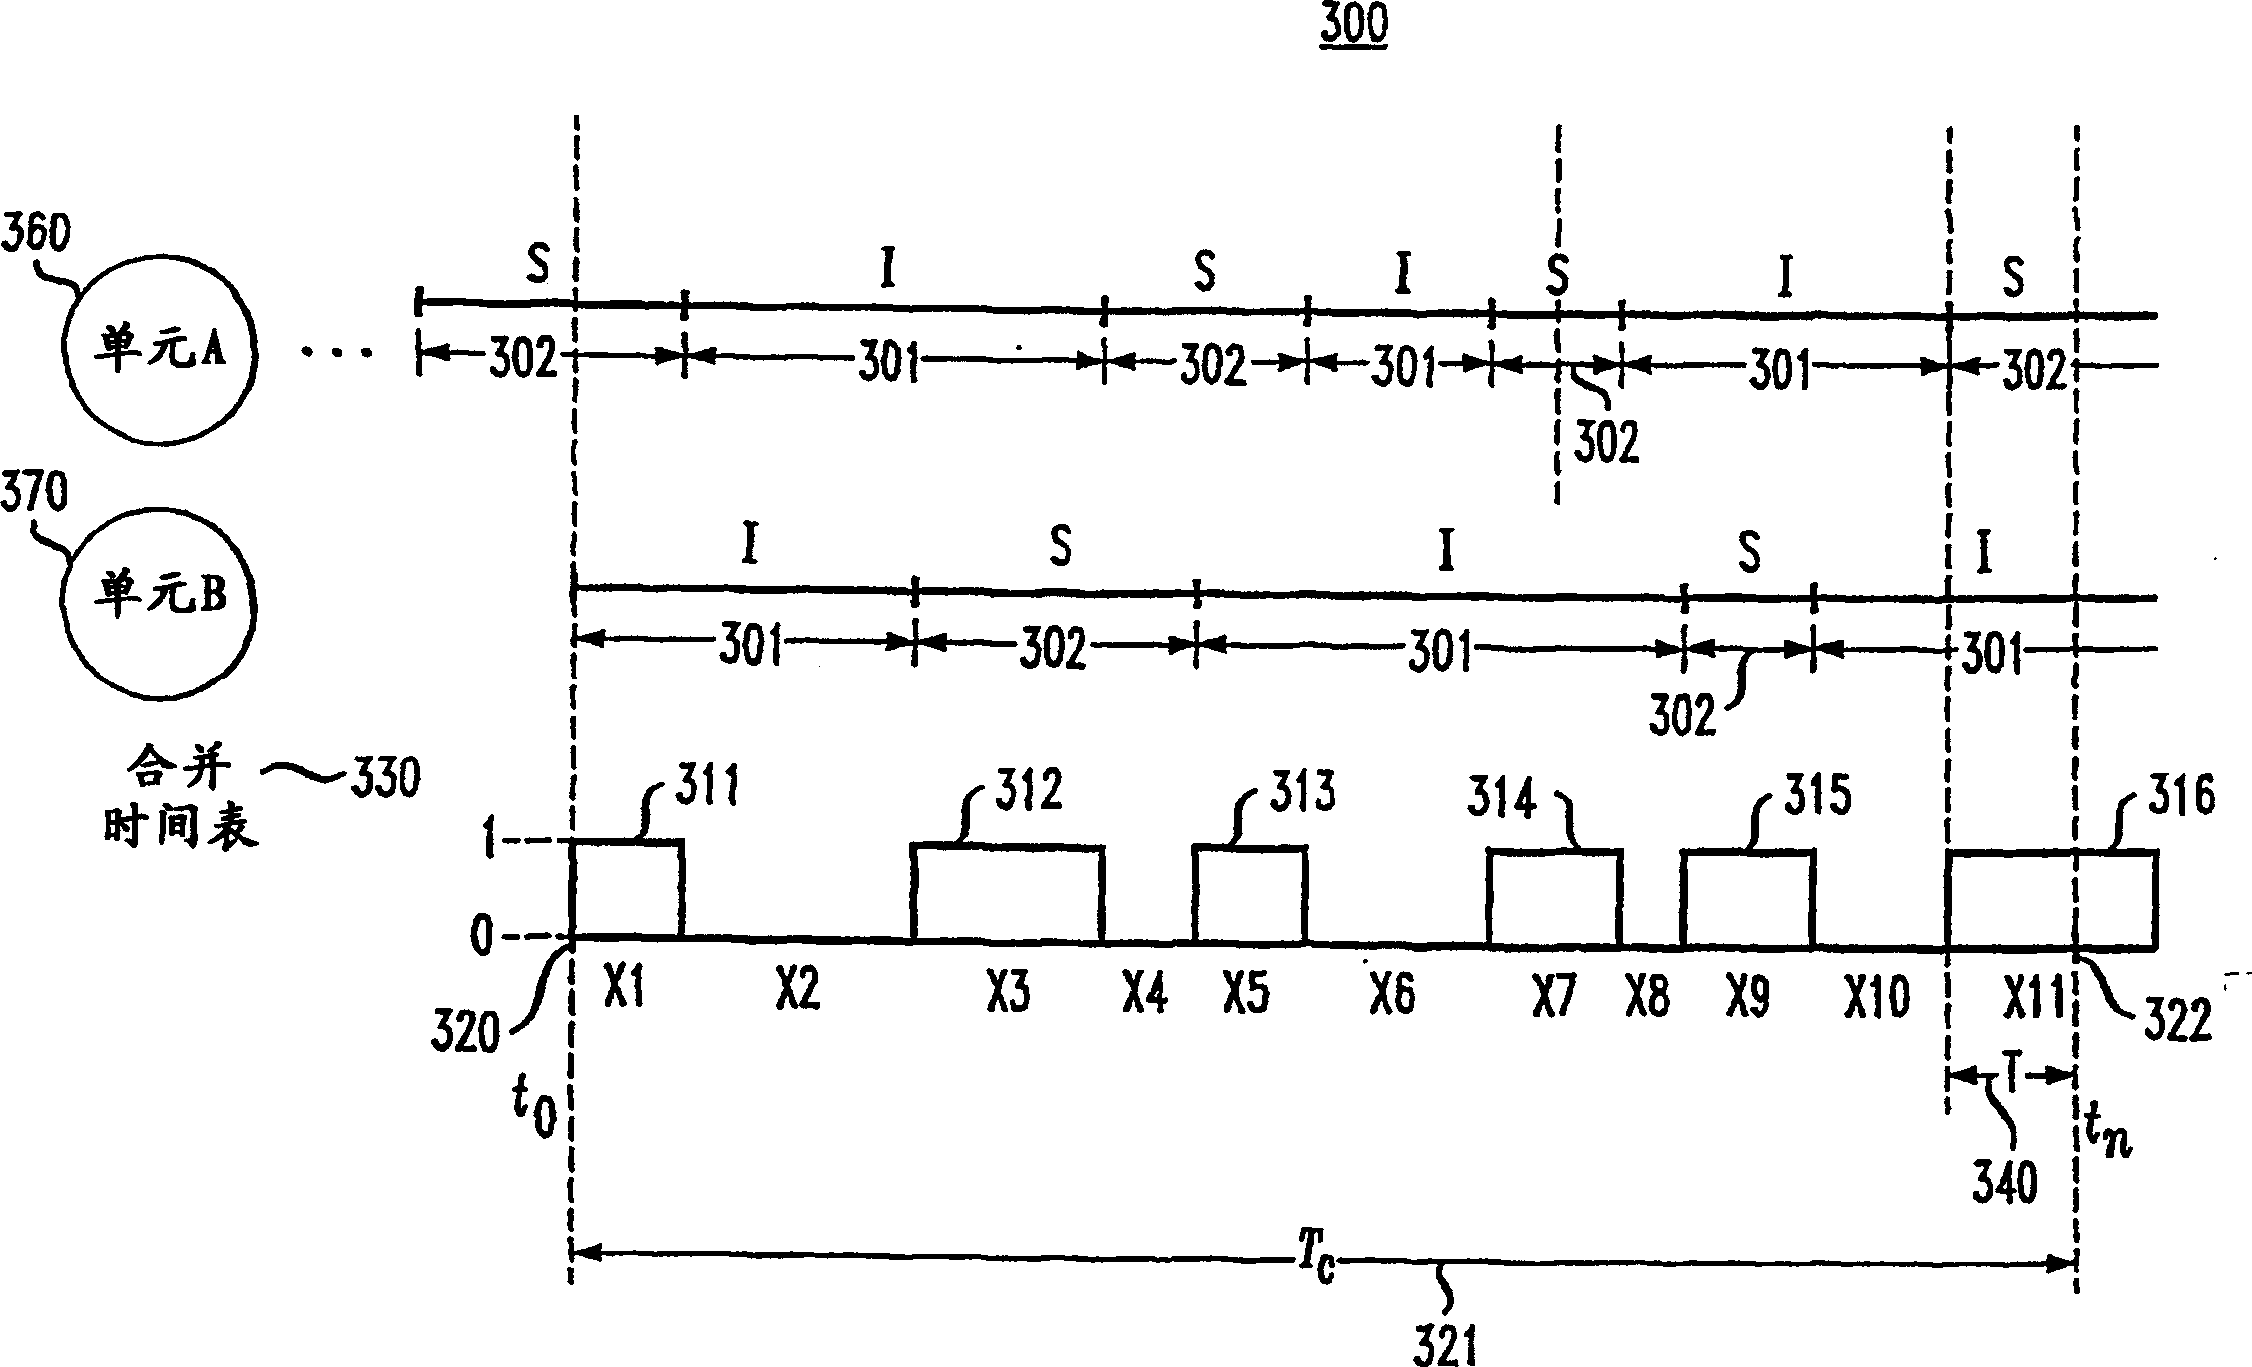 Method and apparatus for connecting devices via an ad hoc wireless communication network